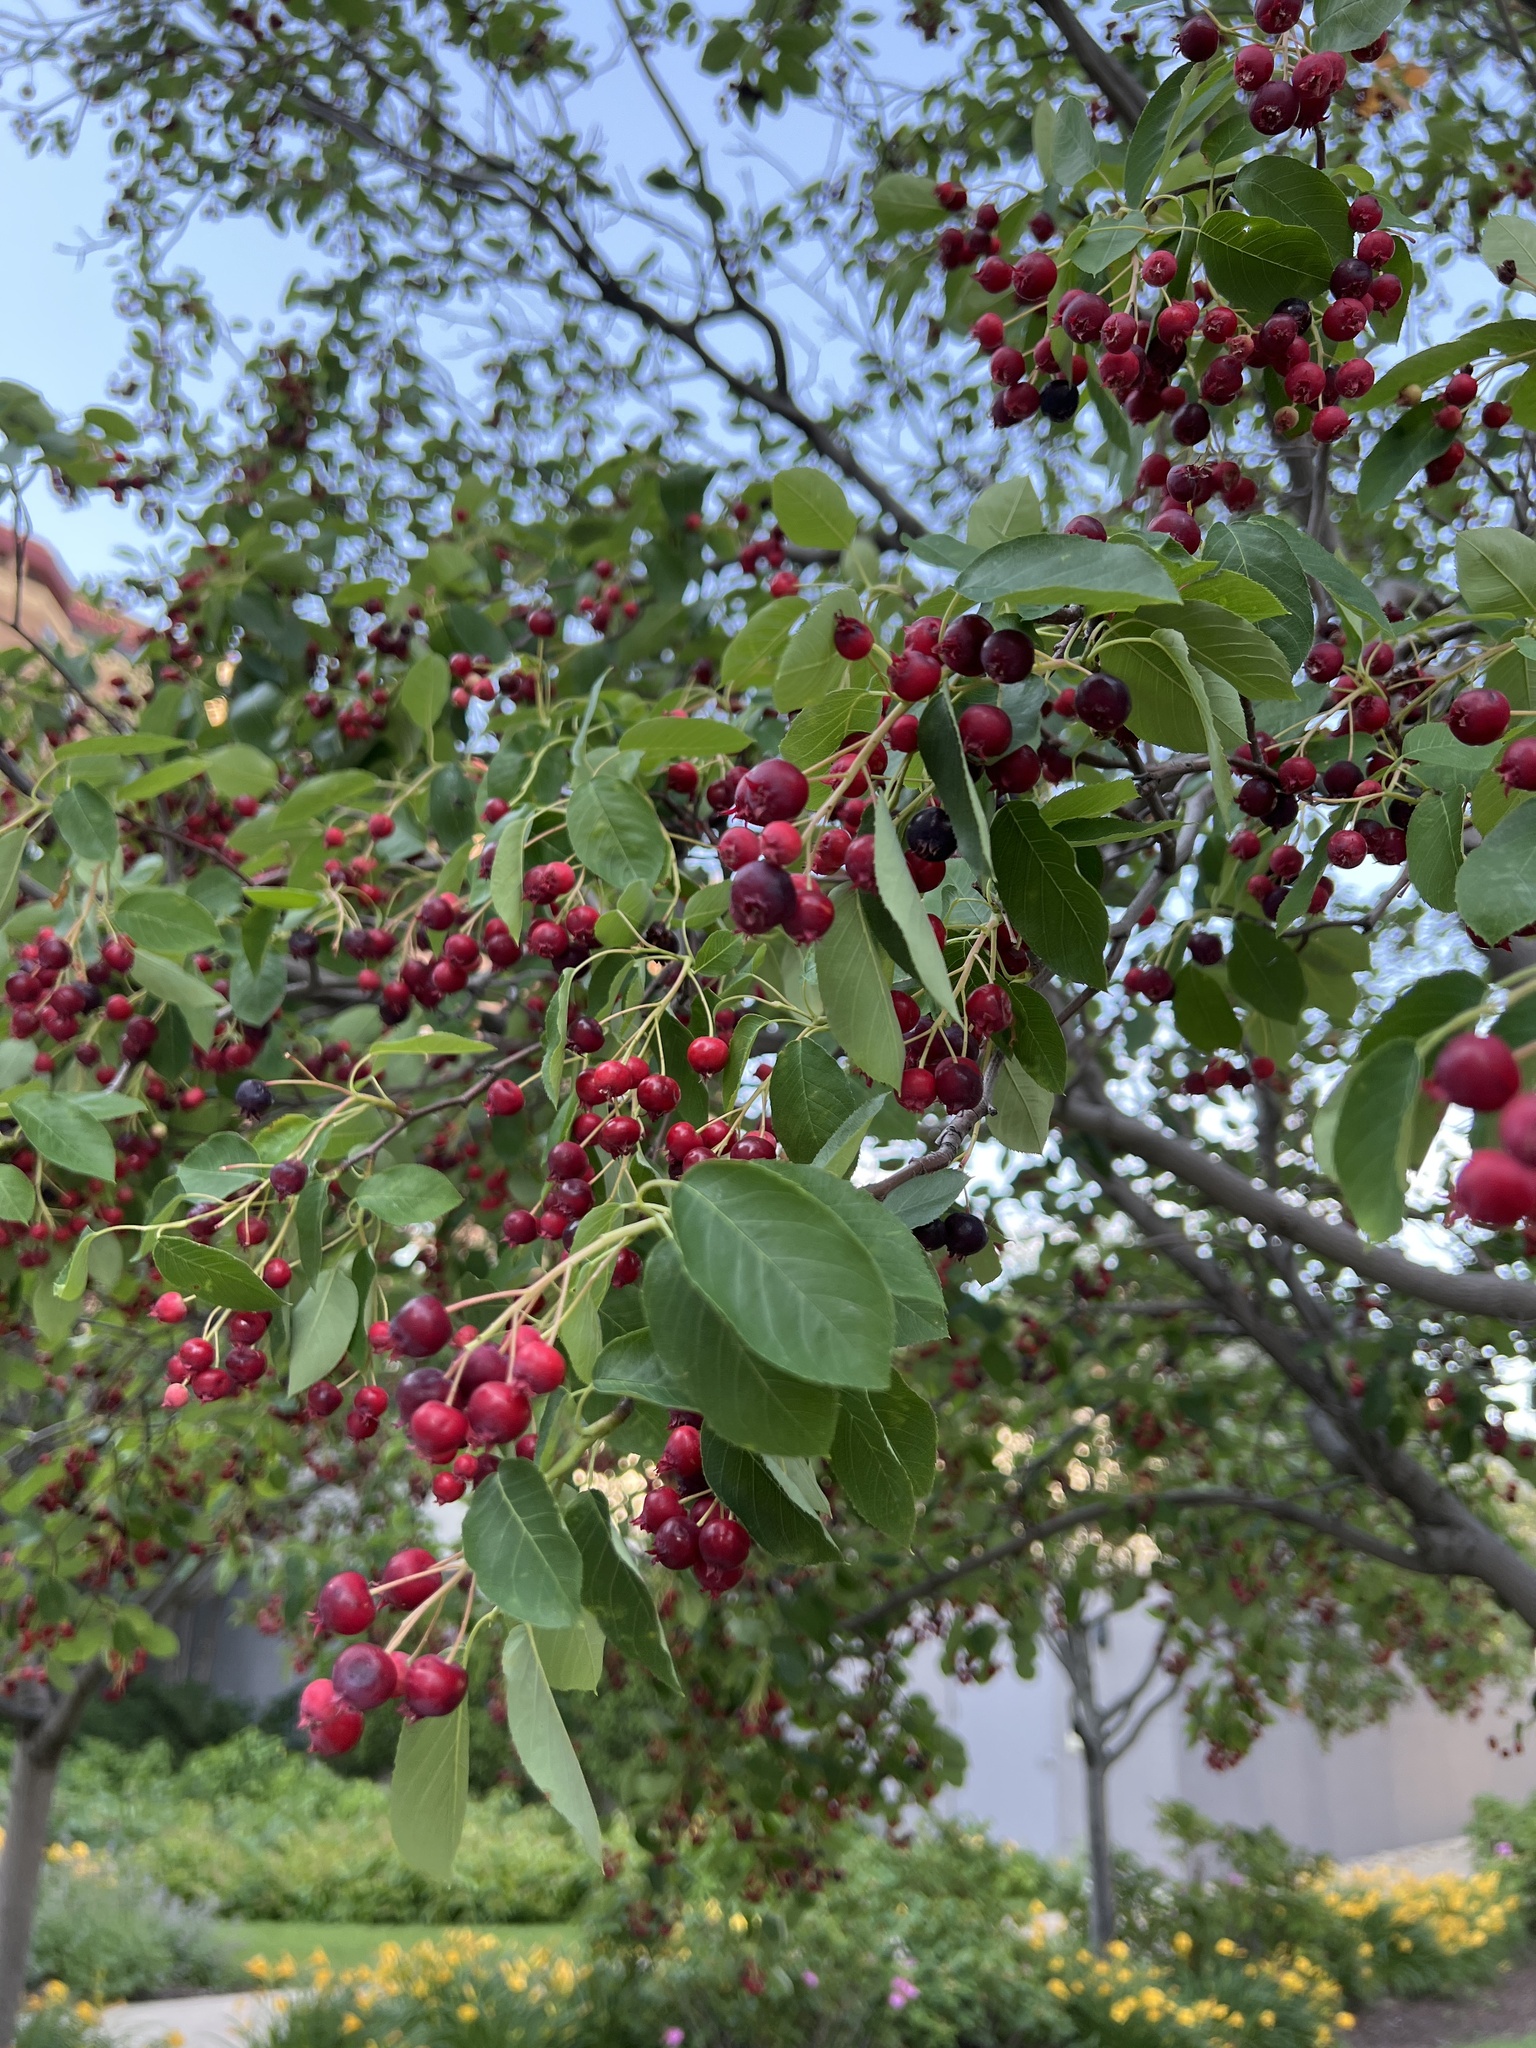 Serviceberry tree in a landscaped setting with lots of red and magenta fruit.